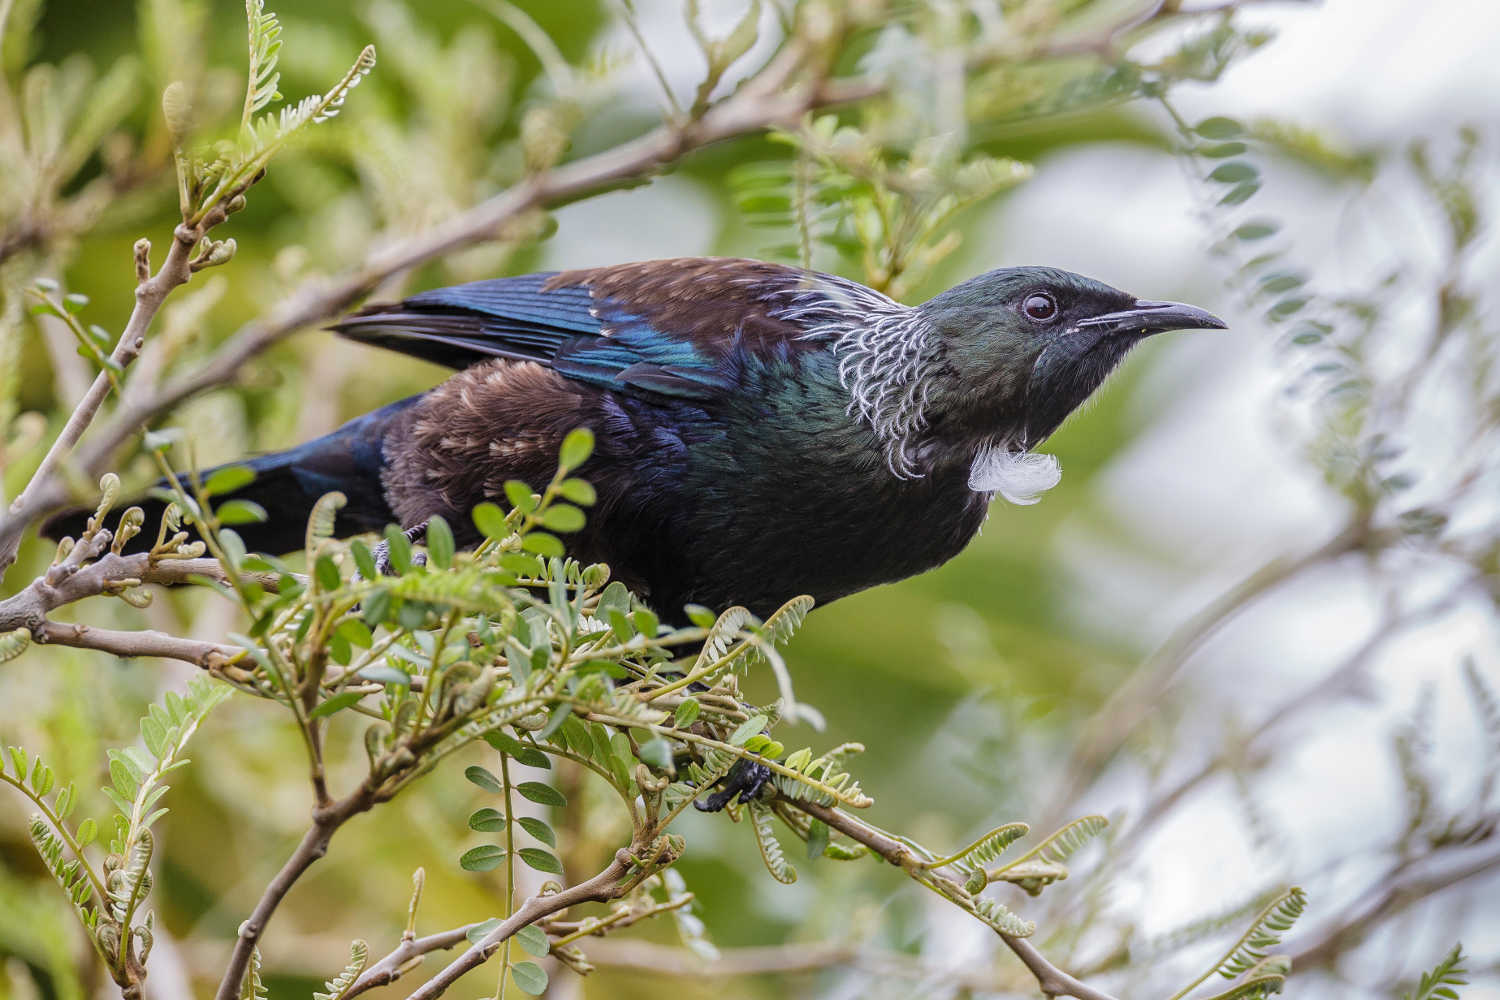 Tui perched on Kowhai tree, Auckland, North Island, New Zealand. September.